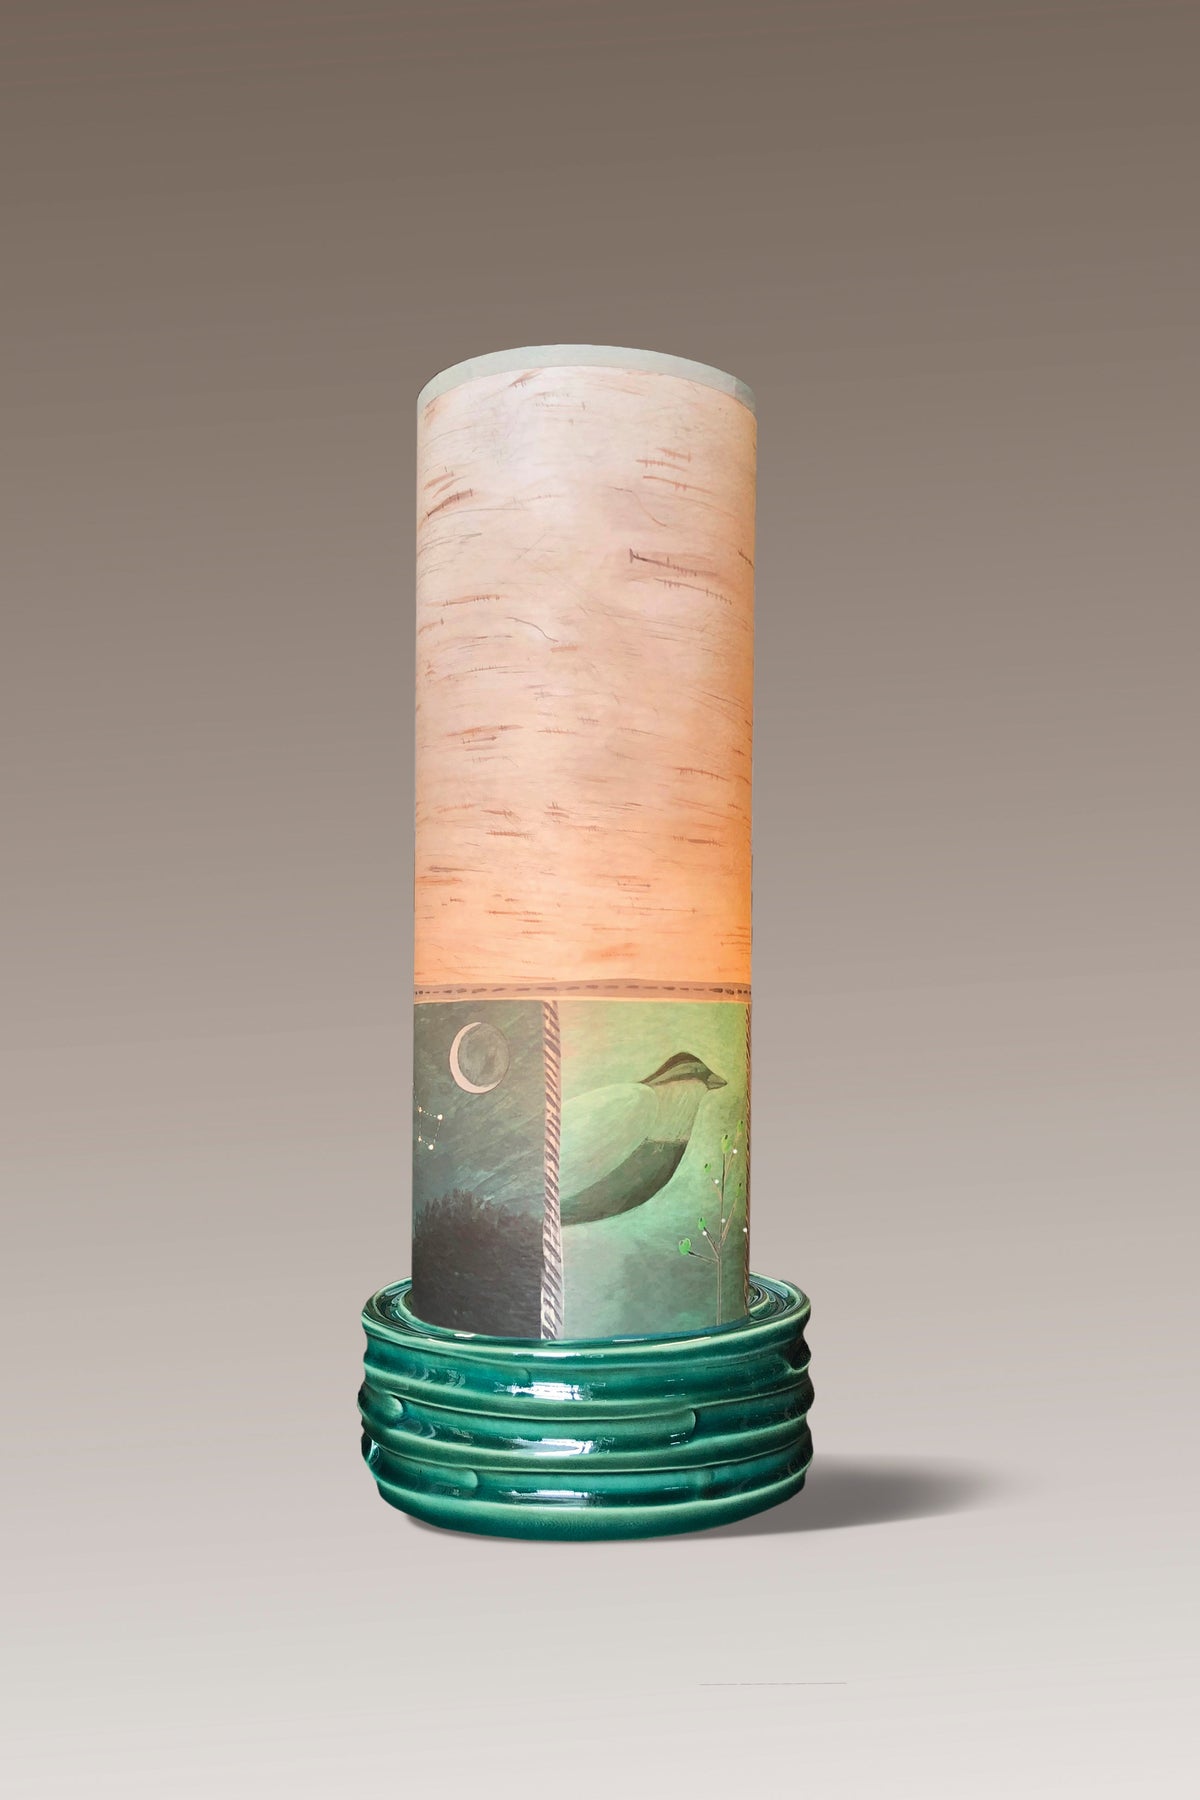 Janna Ugone &amp; Co Luminaires Pool Ceramic Luminaire Accent Lamp with Woodland Trails in Birch Shade